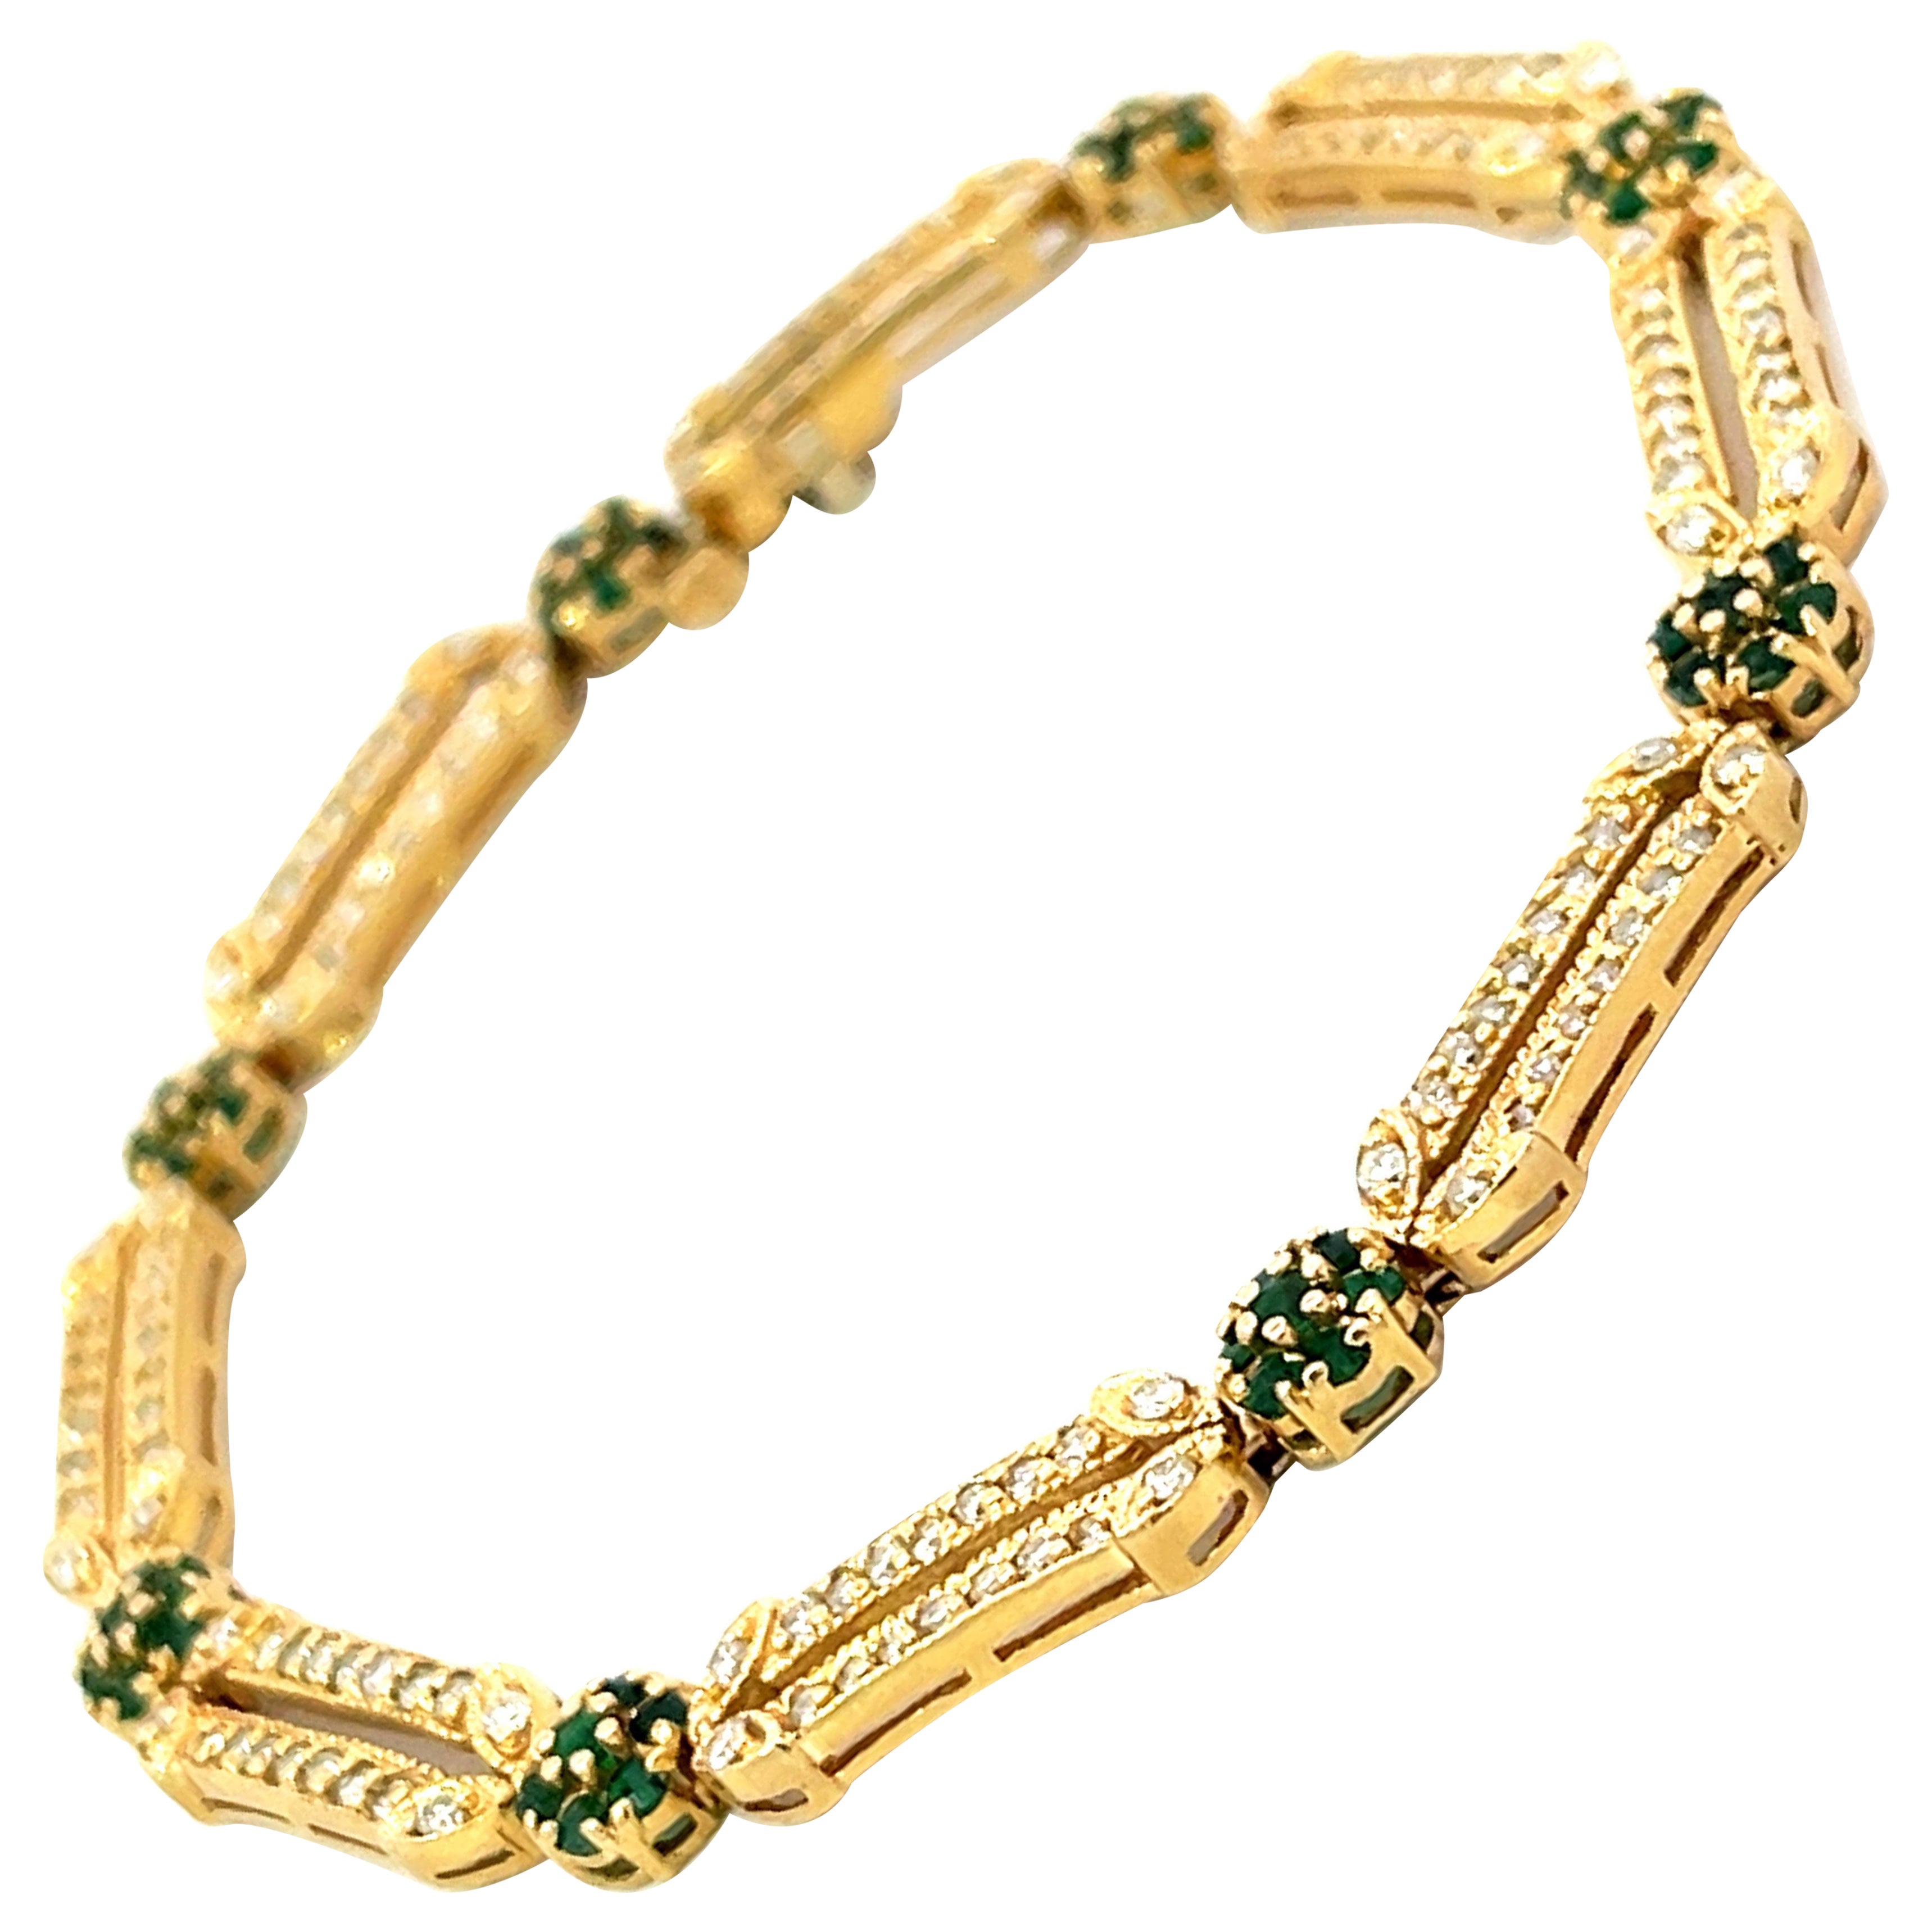 Emerald Flower and Diamond Link Bracelet in 14k Yellow Gold